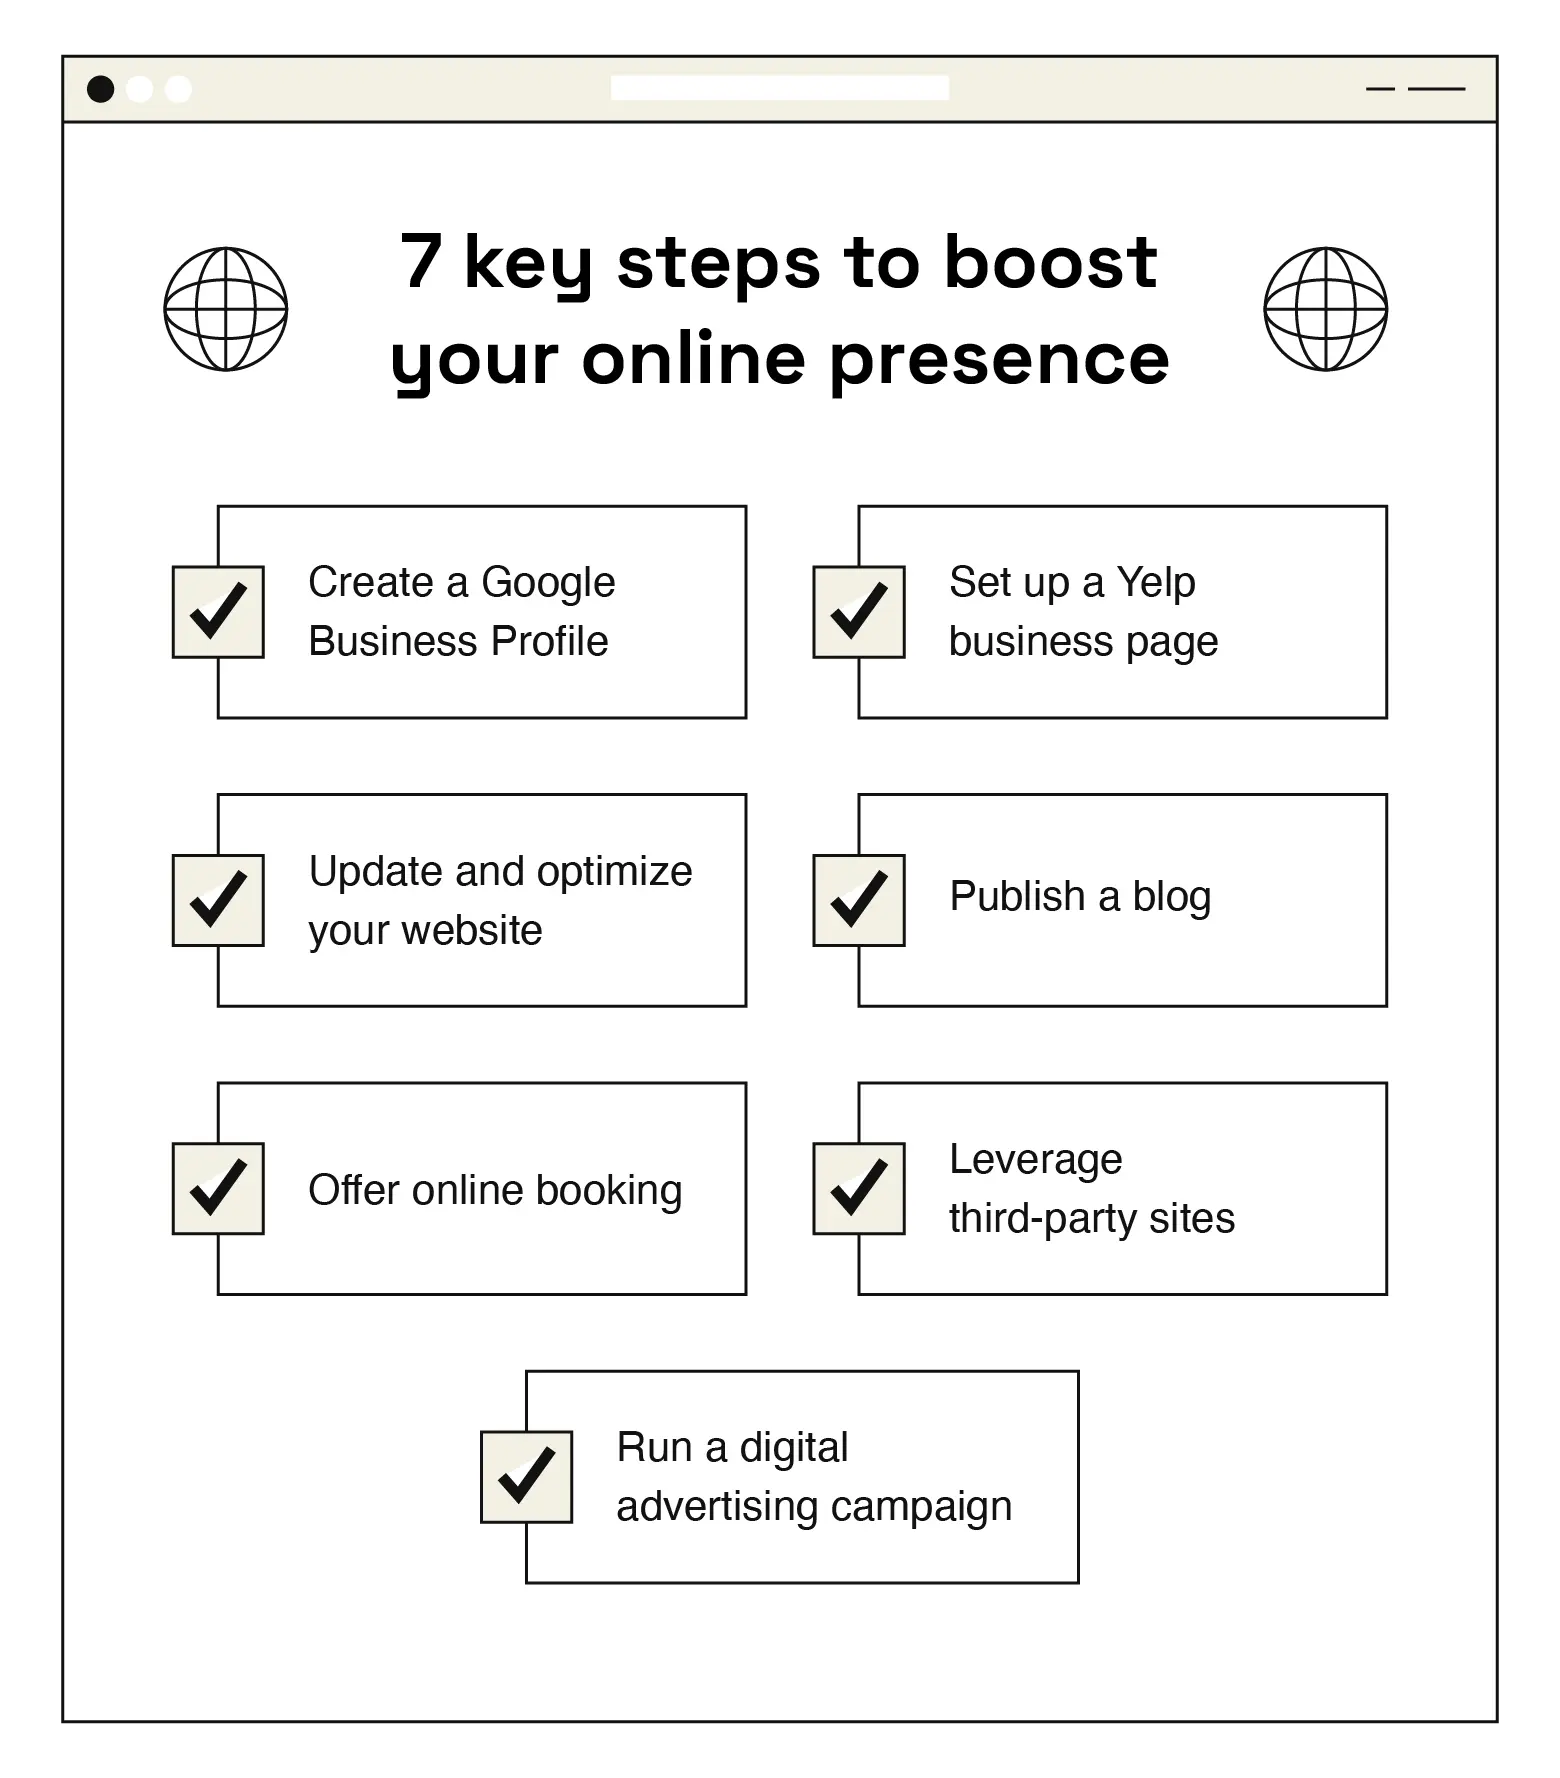 image covers steps for increasing online presence.